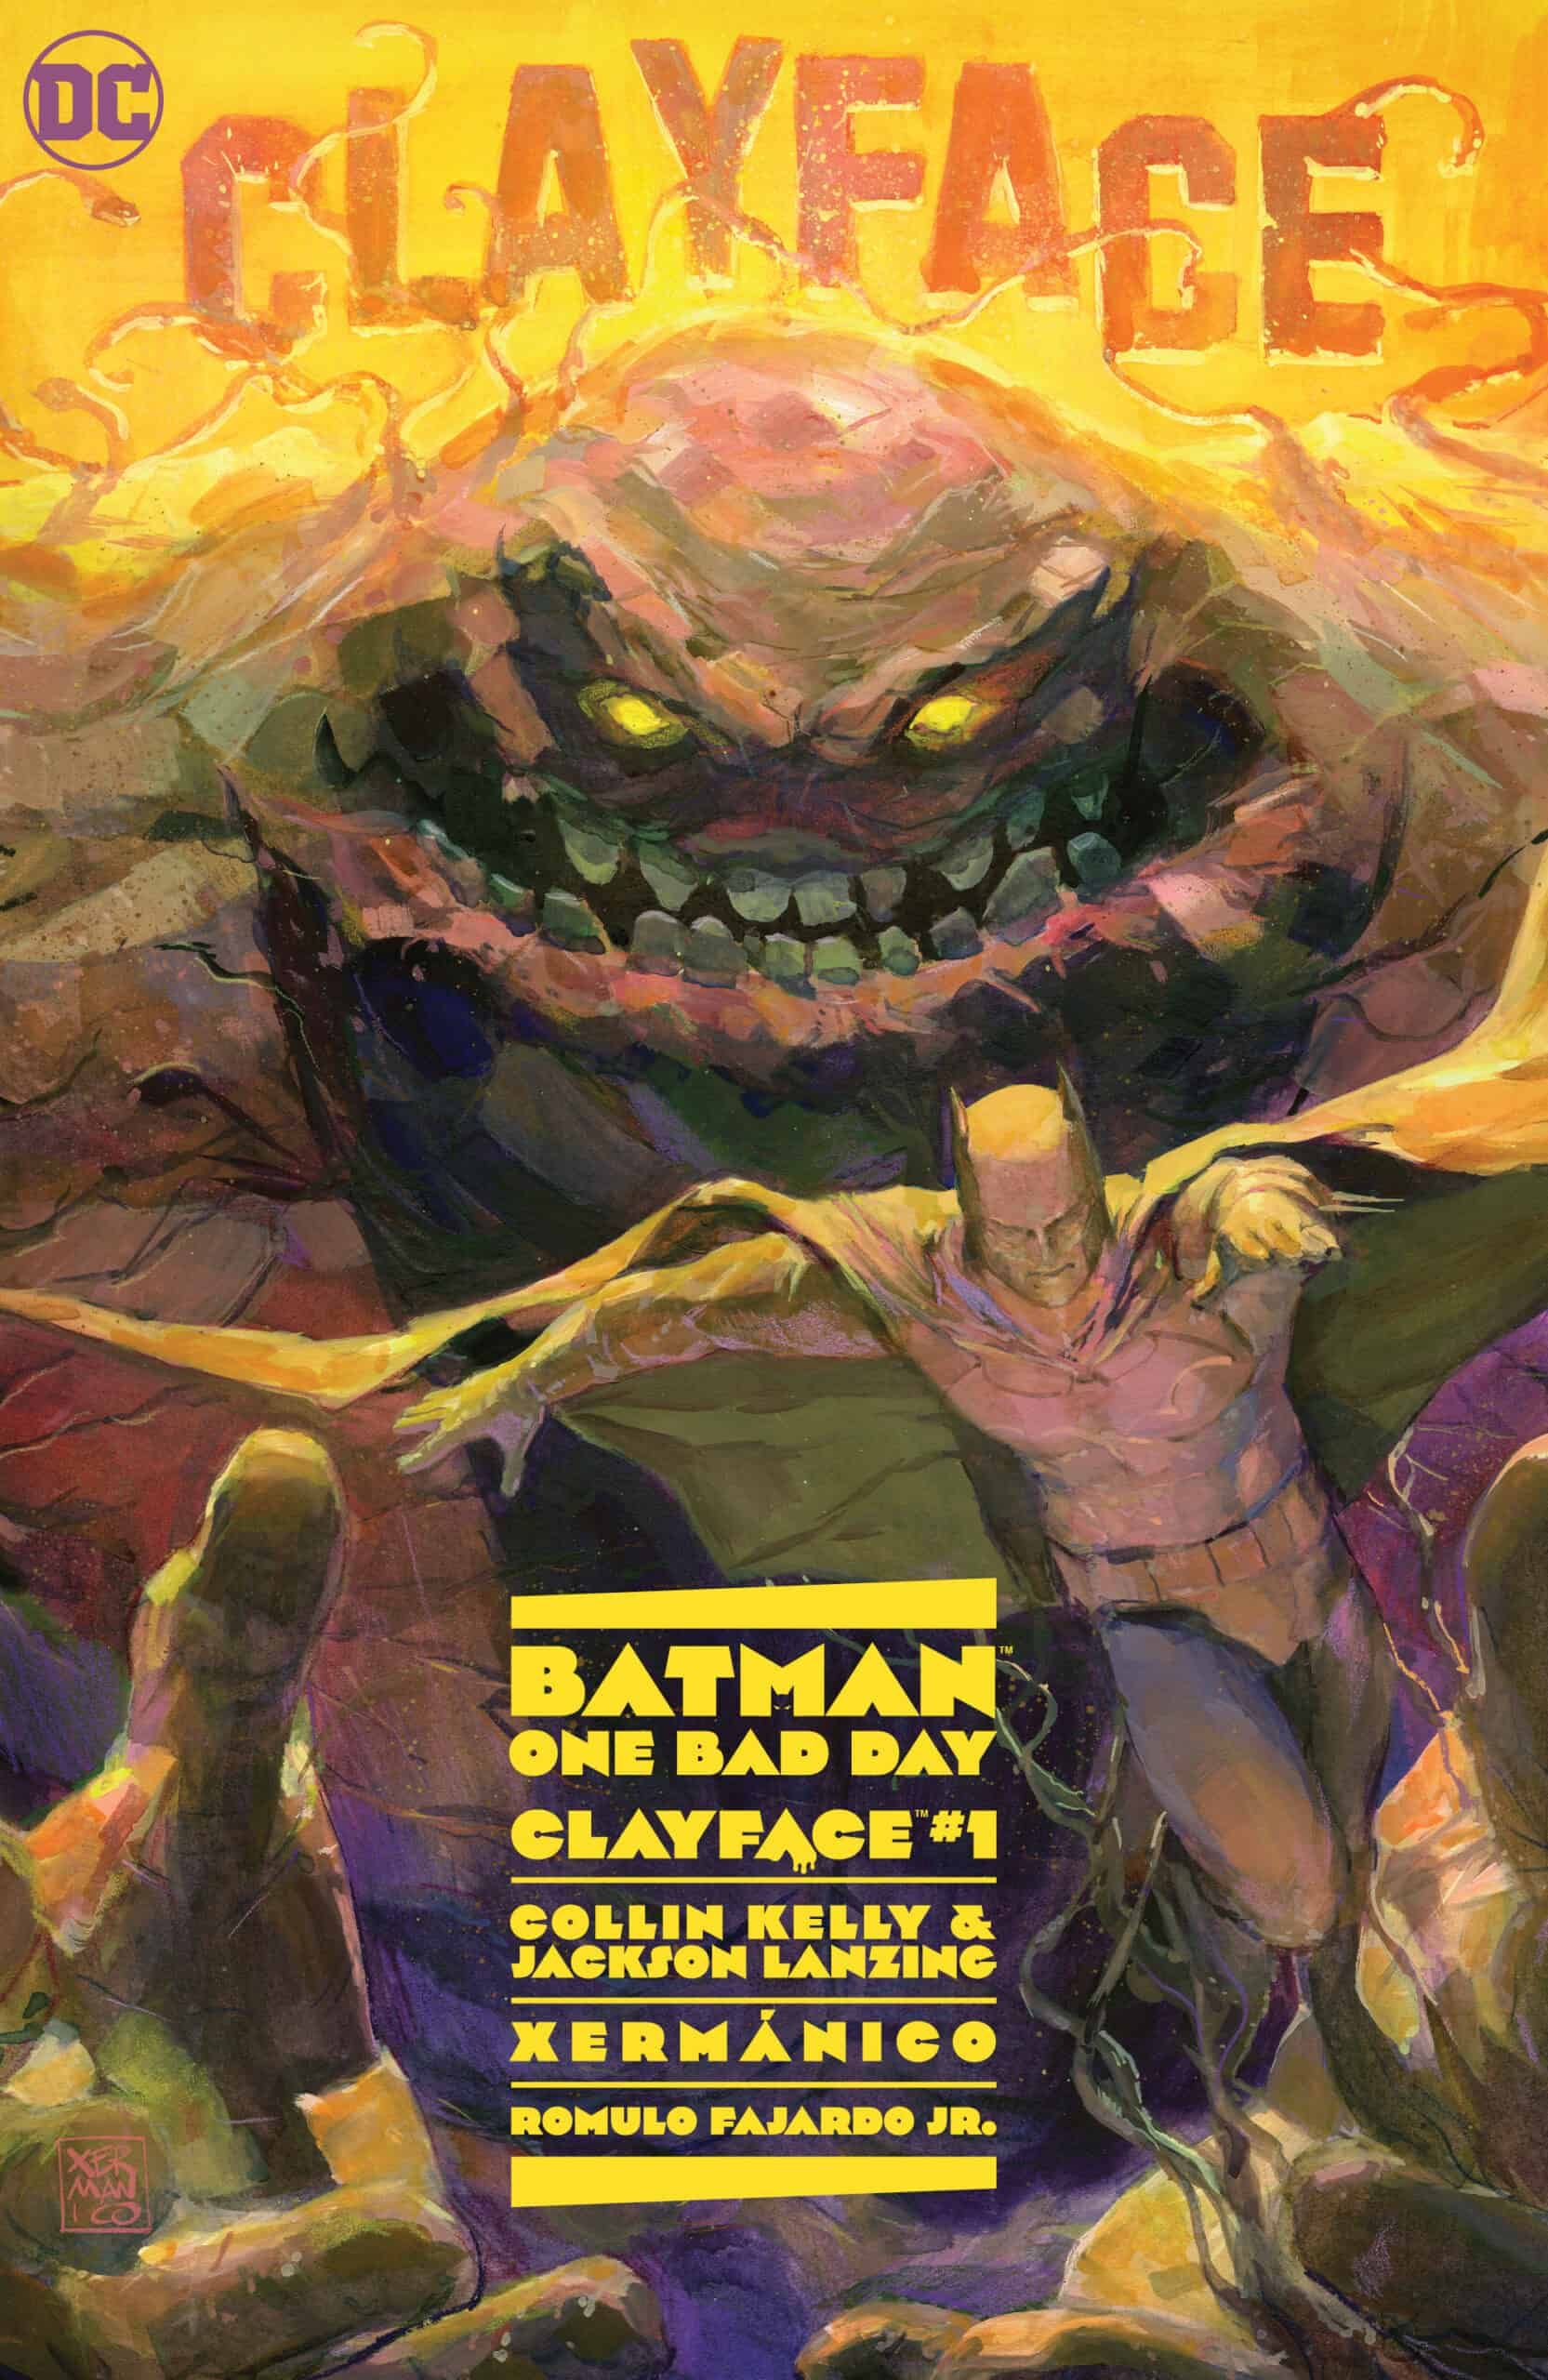 Batman One Bad Day - Clayface #1 Cover